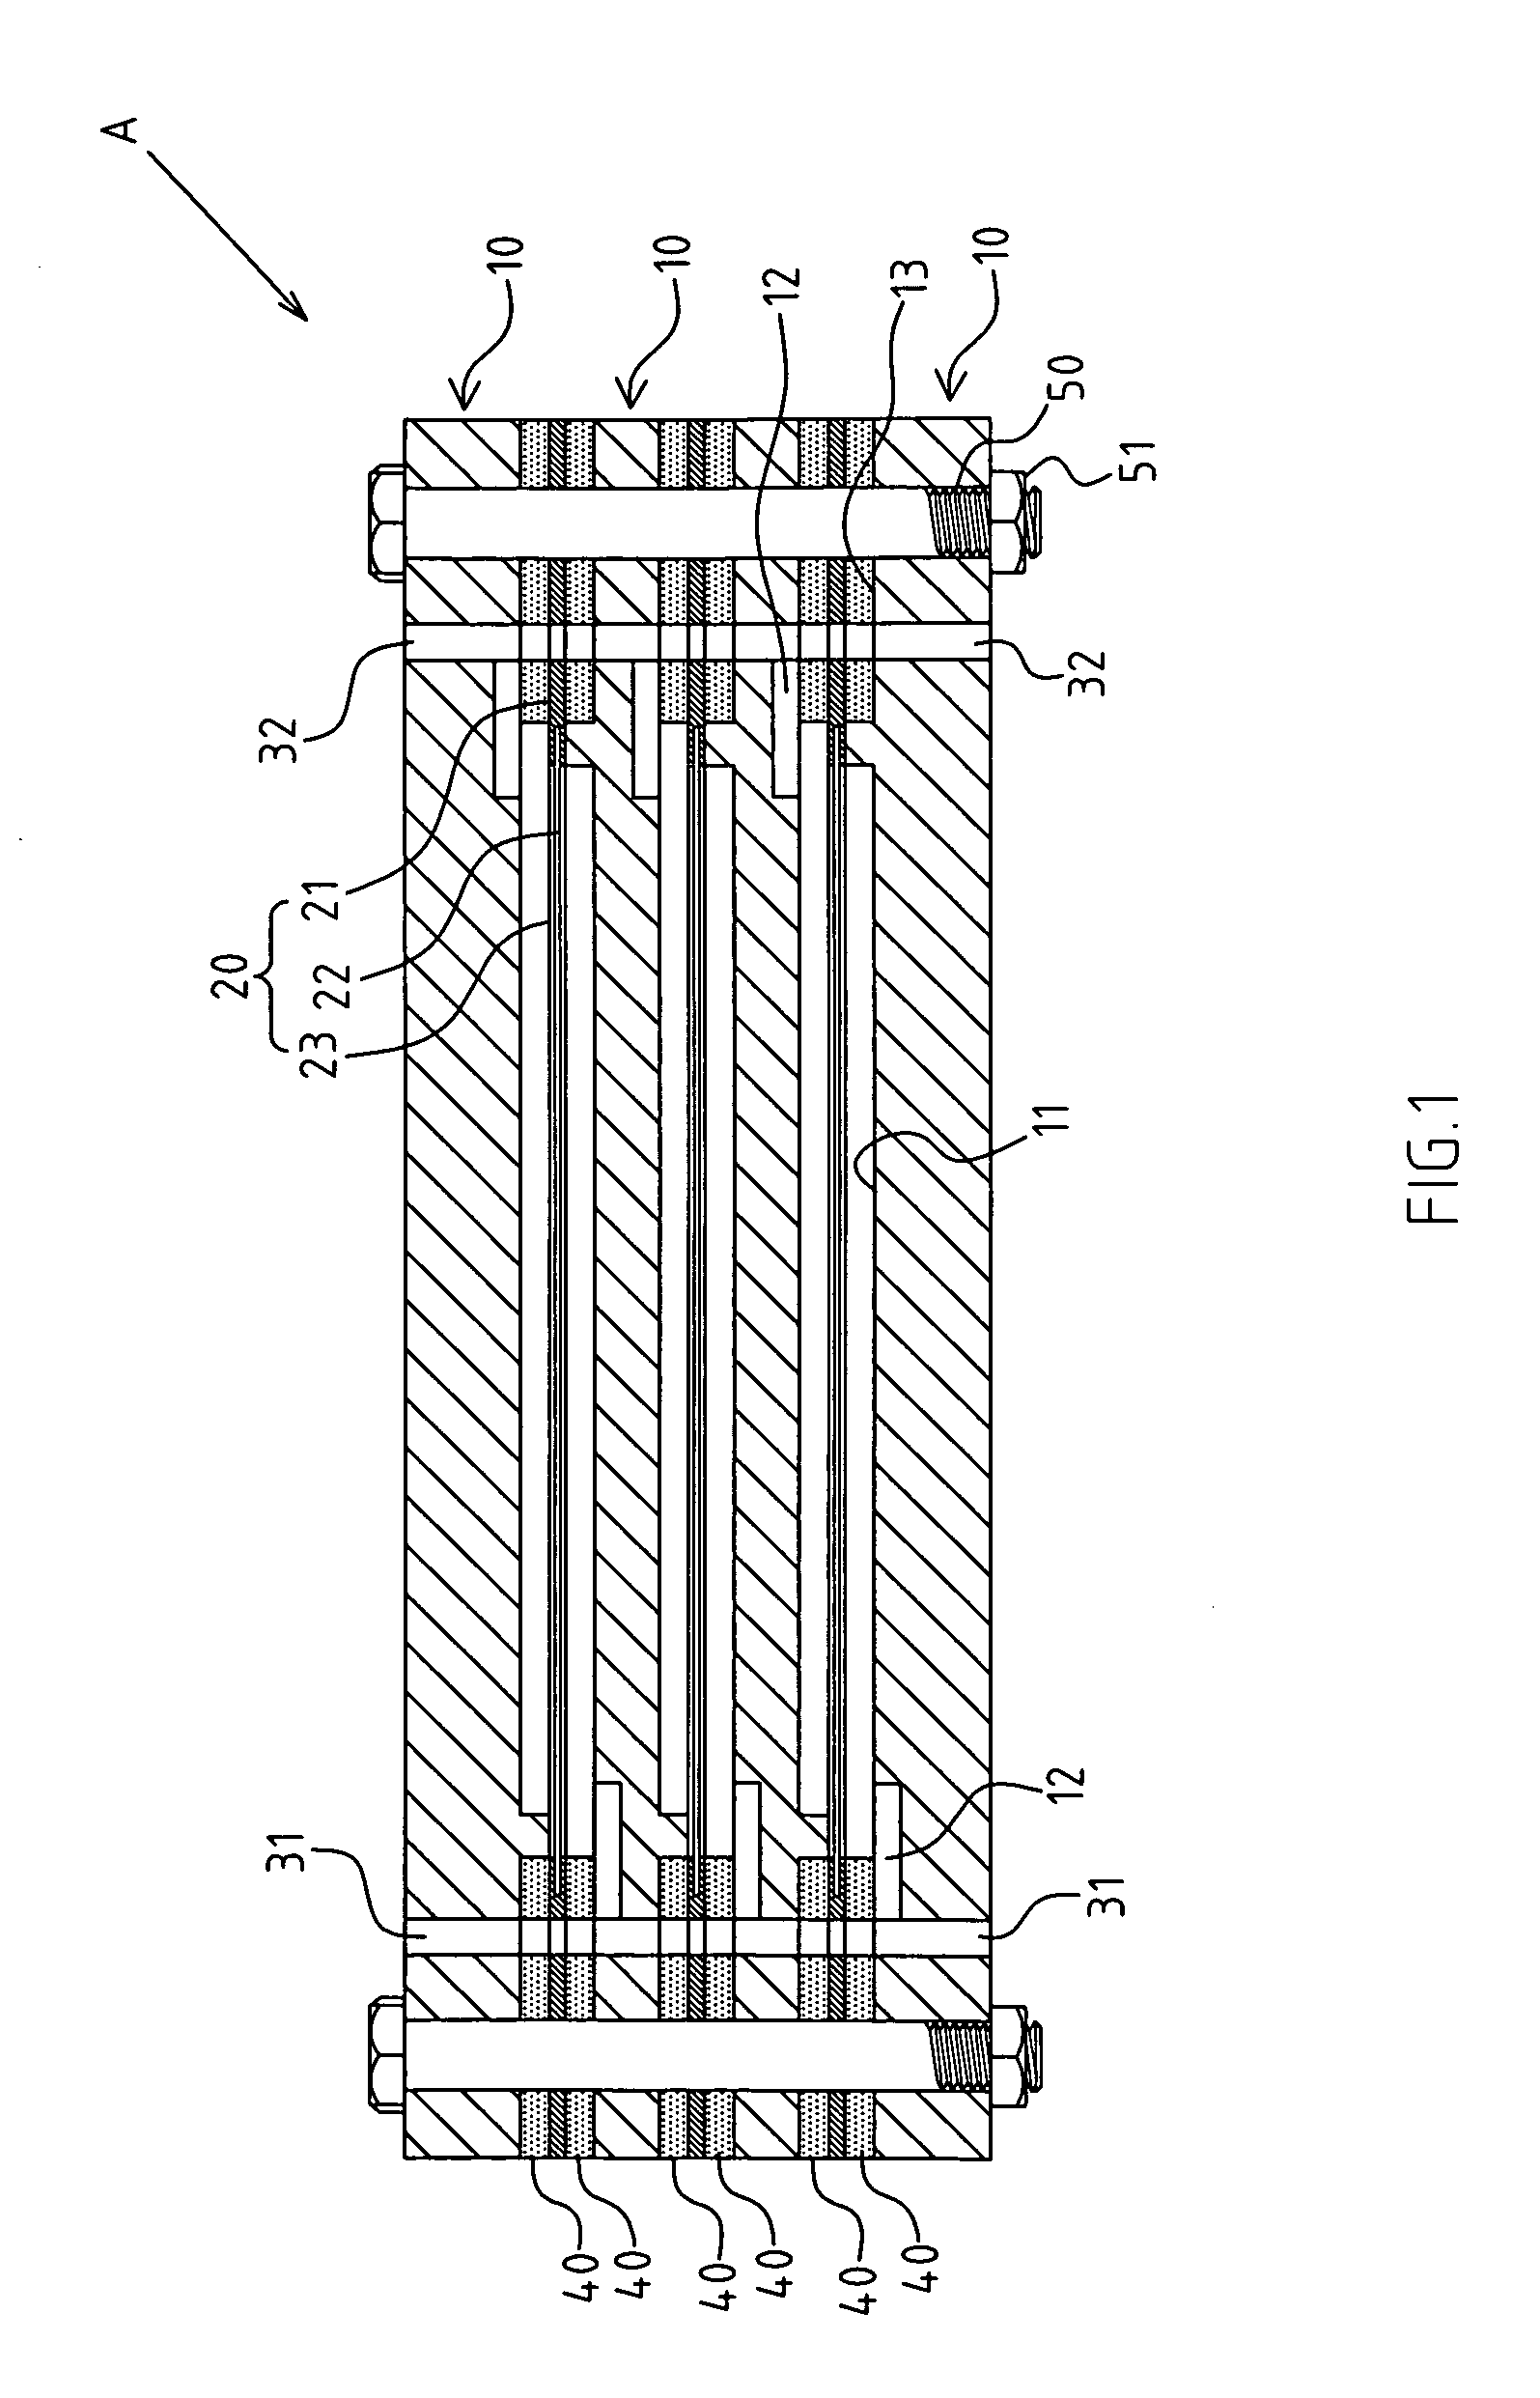 Sealing structure for a bipolar plate of a fuel cell